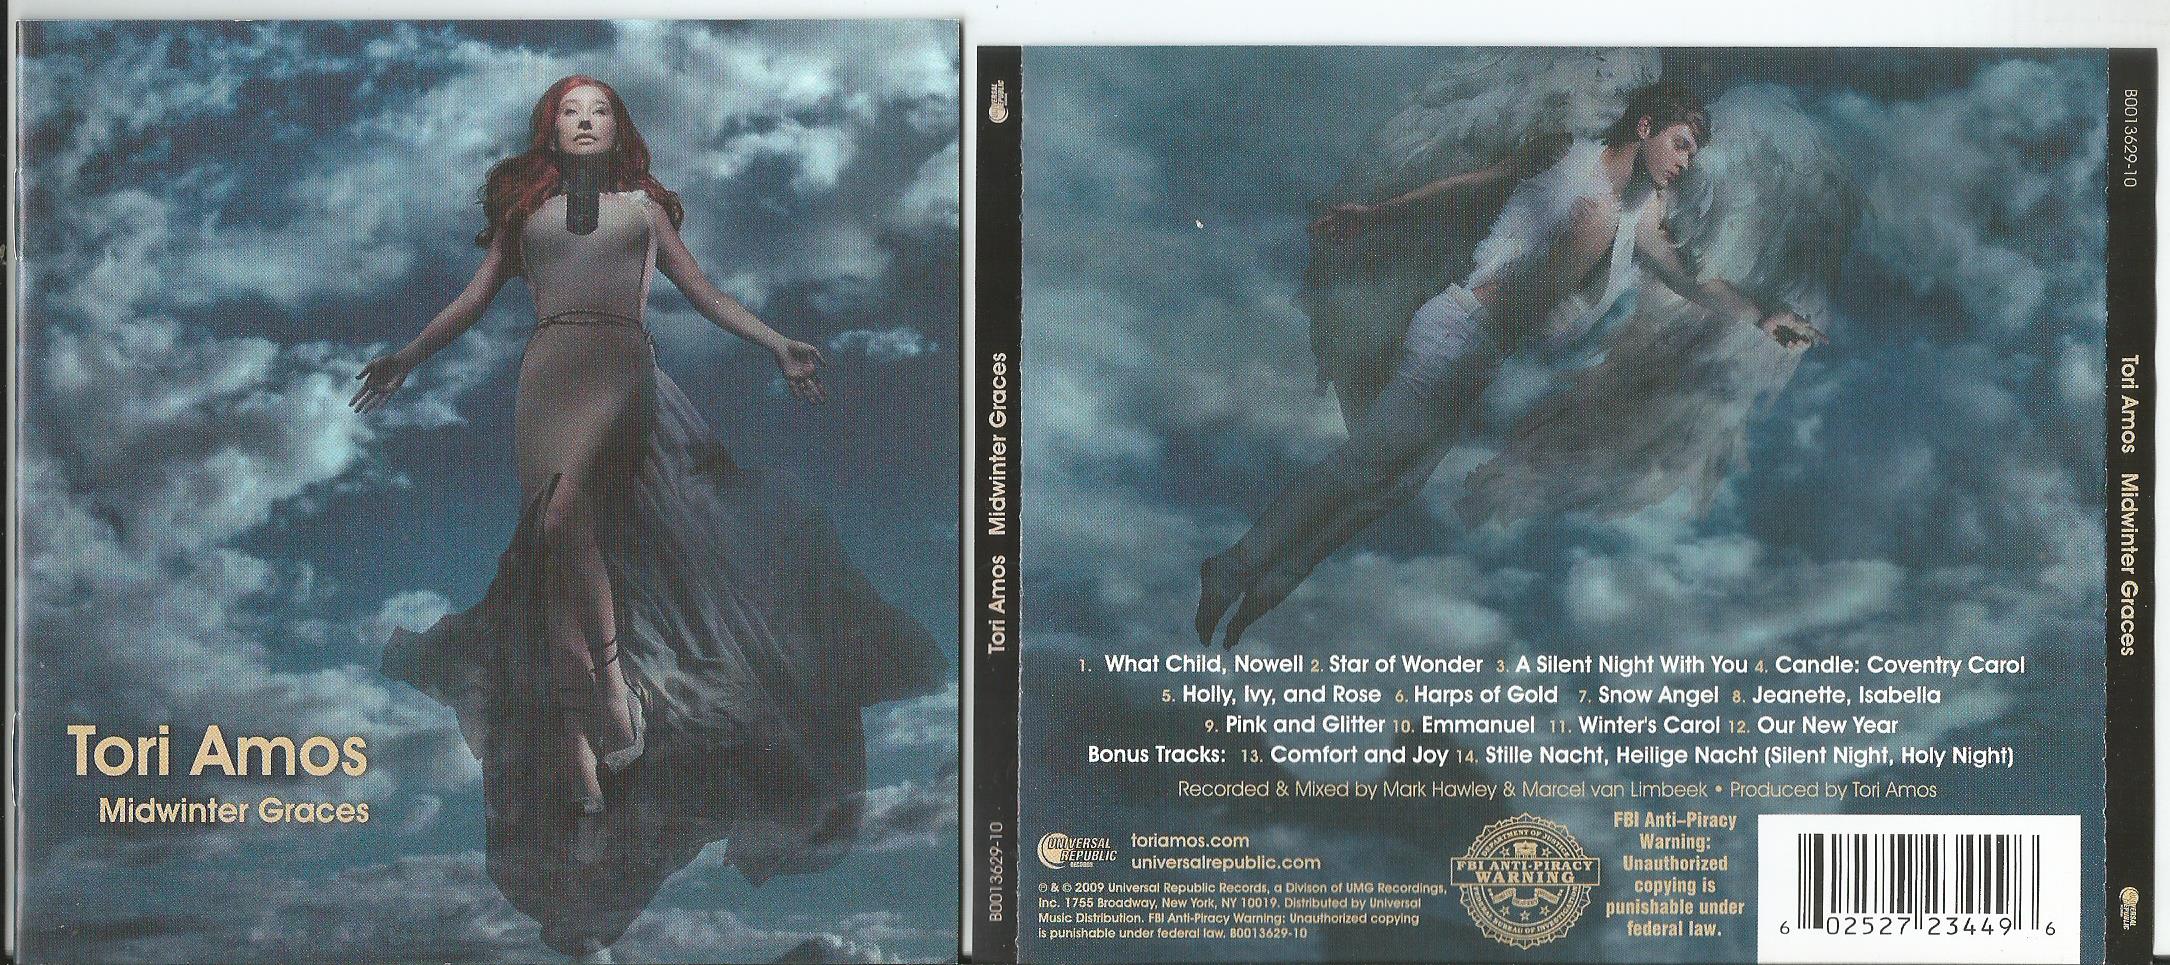 AMOS, TORI Midwinter Graces (20page booklet with lyrics, jewel case edition...